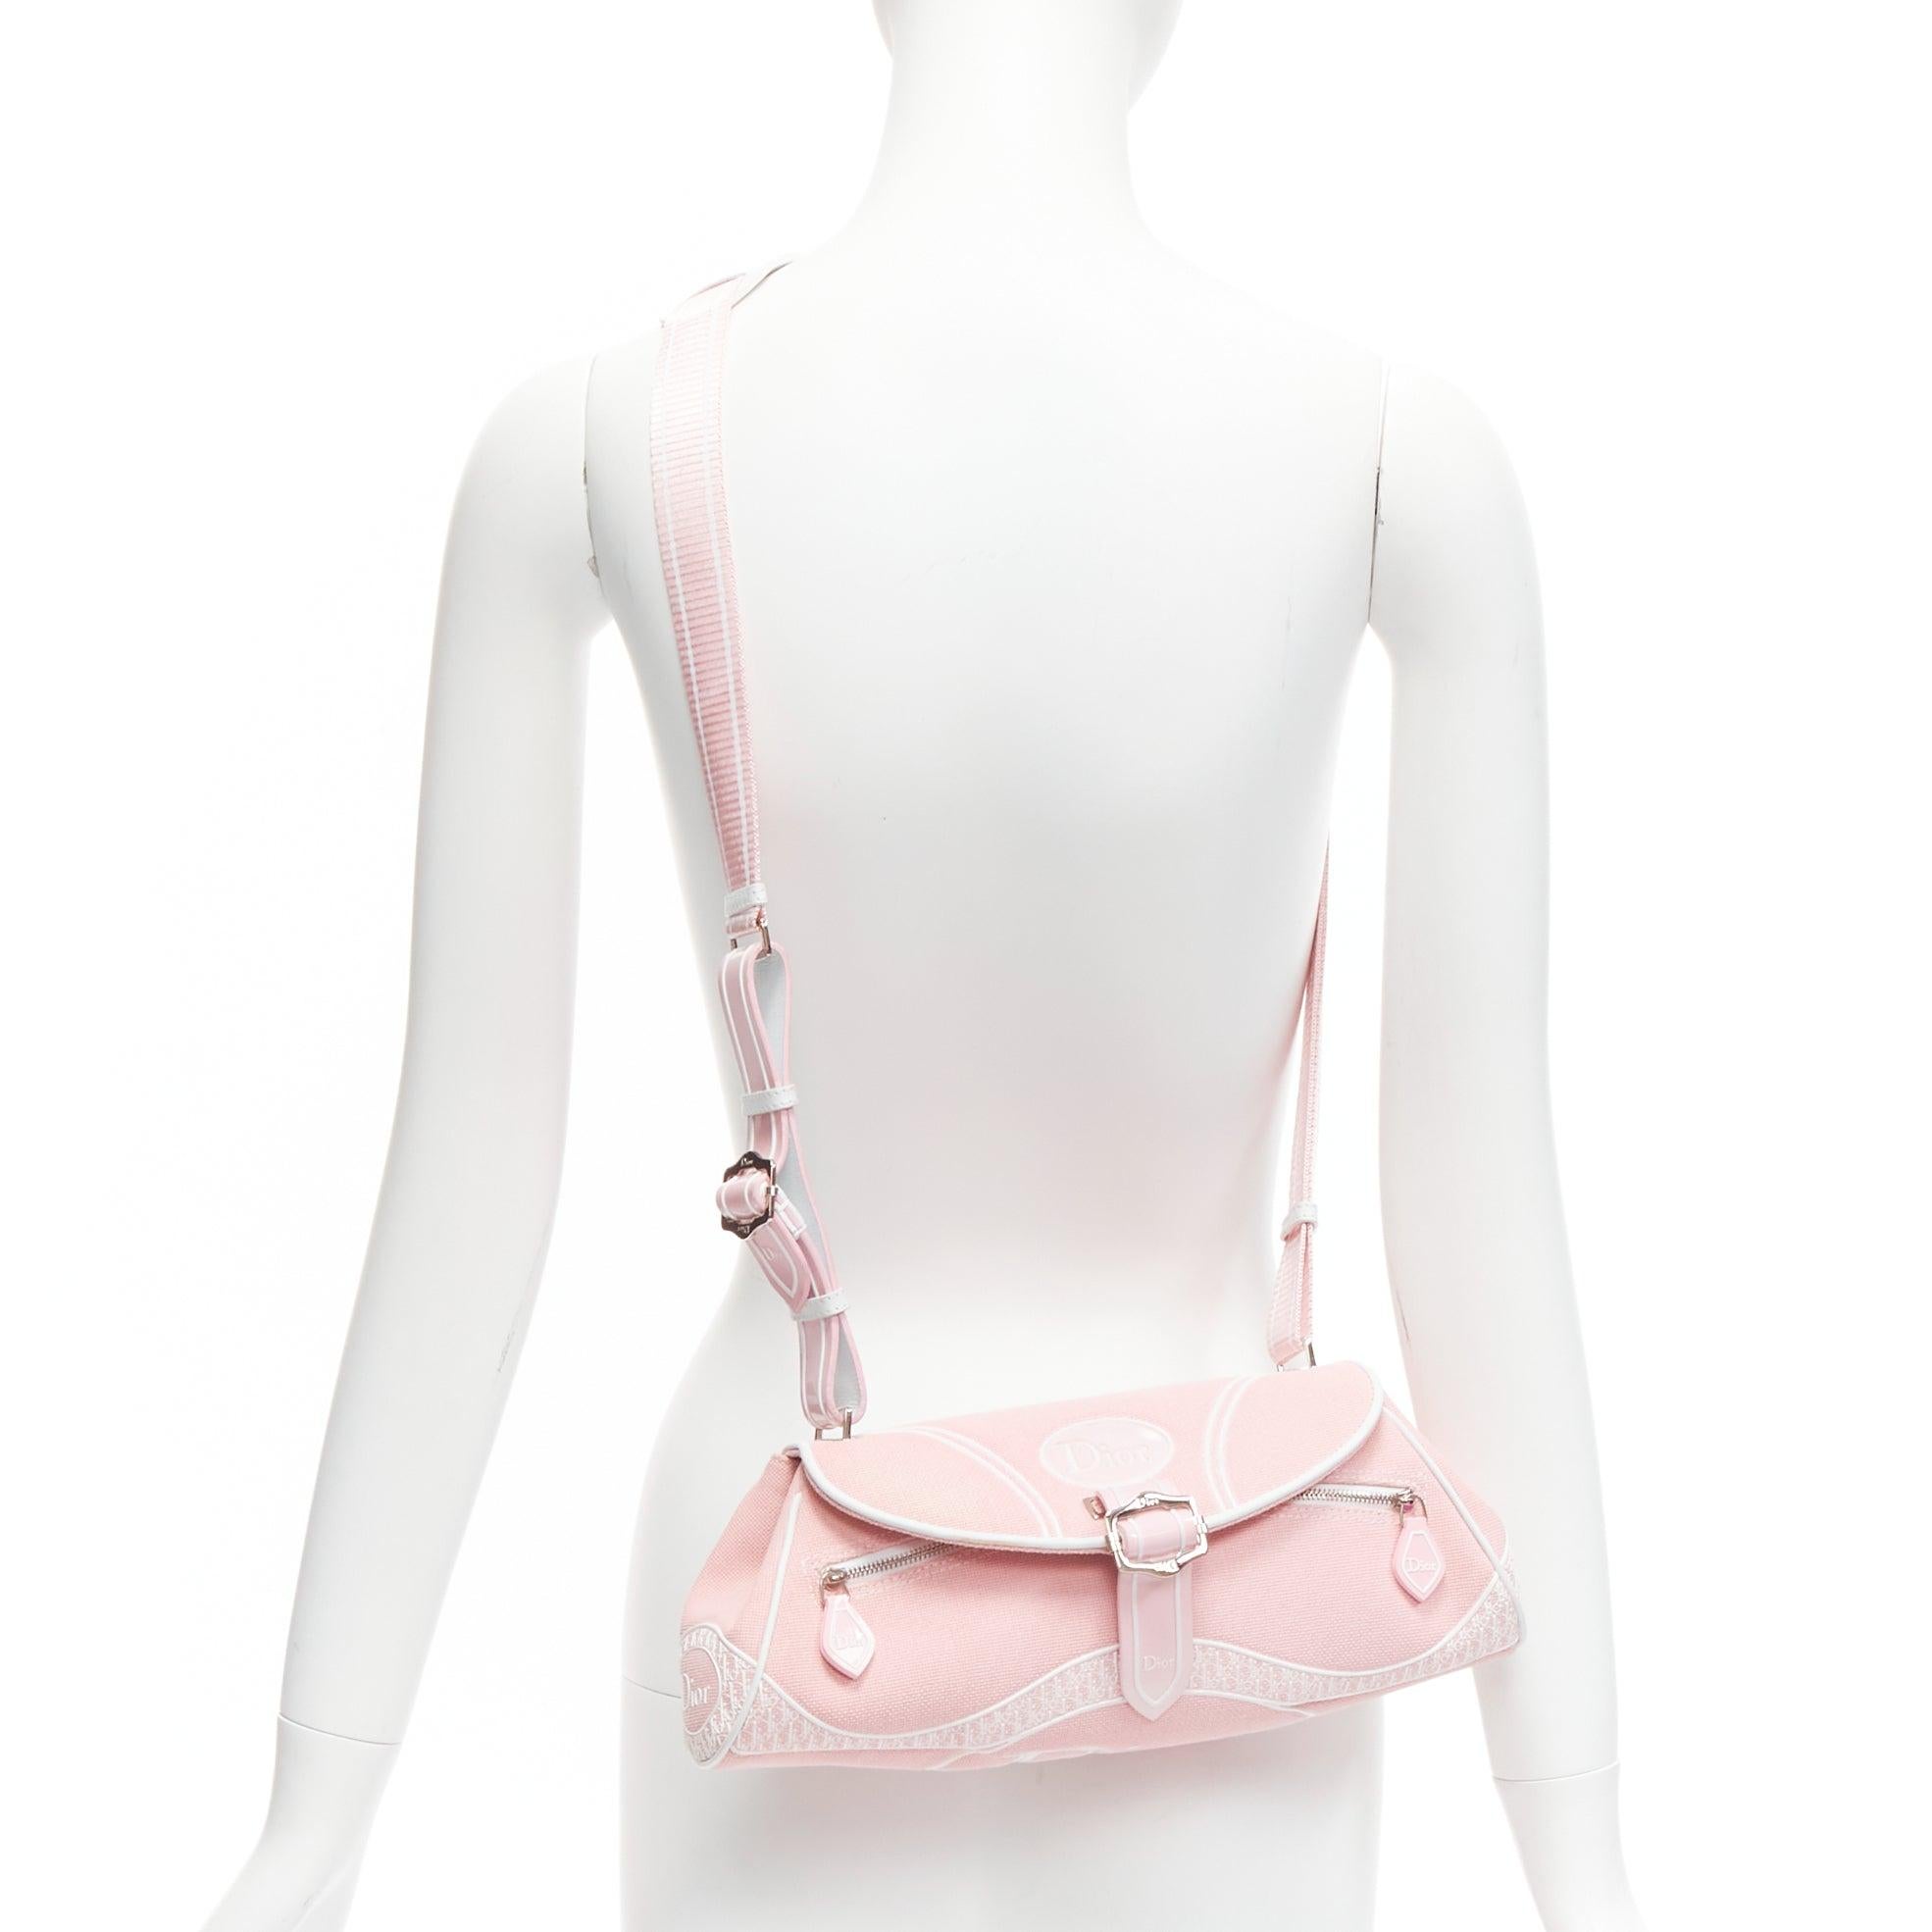 CHRISTIAN DIOR Y2K pink logo monogram trotter canvas shoulder bag
Reference: TGAS/D00563
Brand: Christian Dior
Designer: John Galliano
Material: Canvas, Leather, Rubber
Color: Pink
Pattern: Monogram
Closure: Snap Buttons
Lining: Pink Fabric
Extra